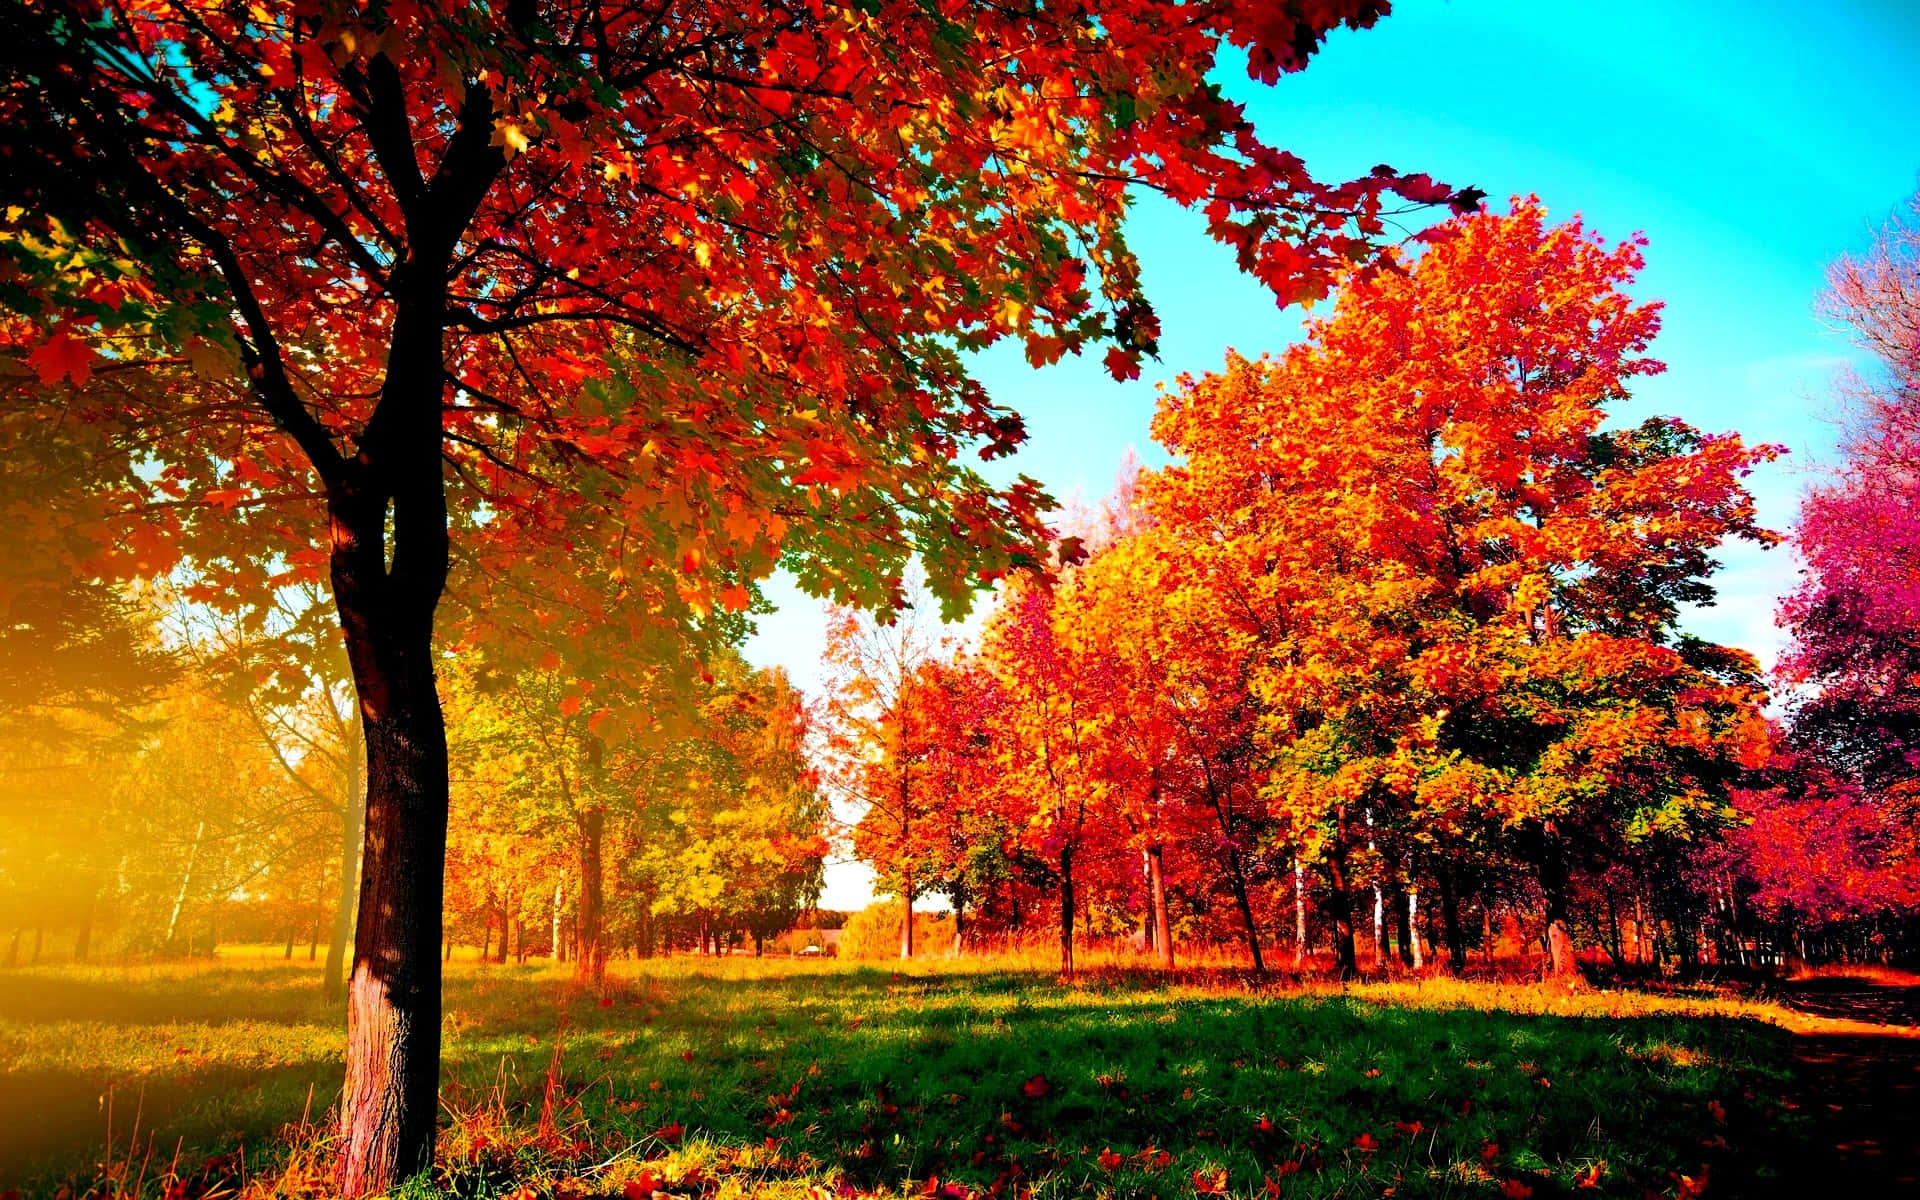 Enchanting autumn scenery with vibrant fall foliage against a cool blue sky